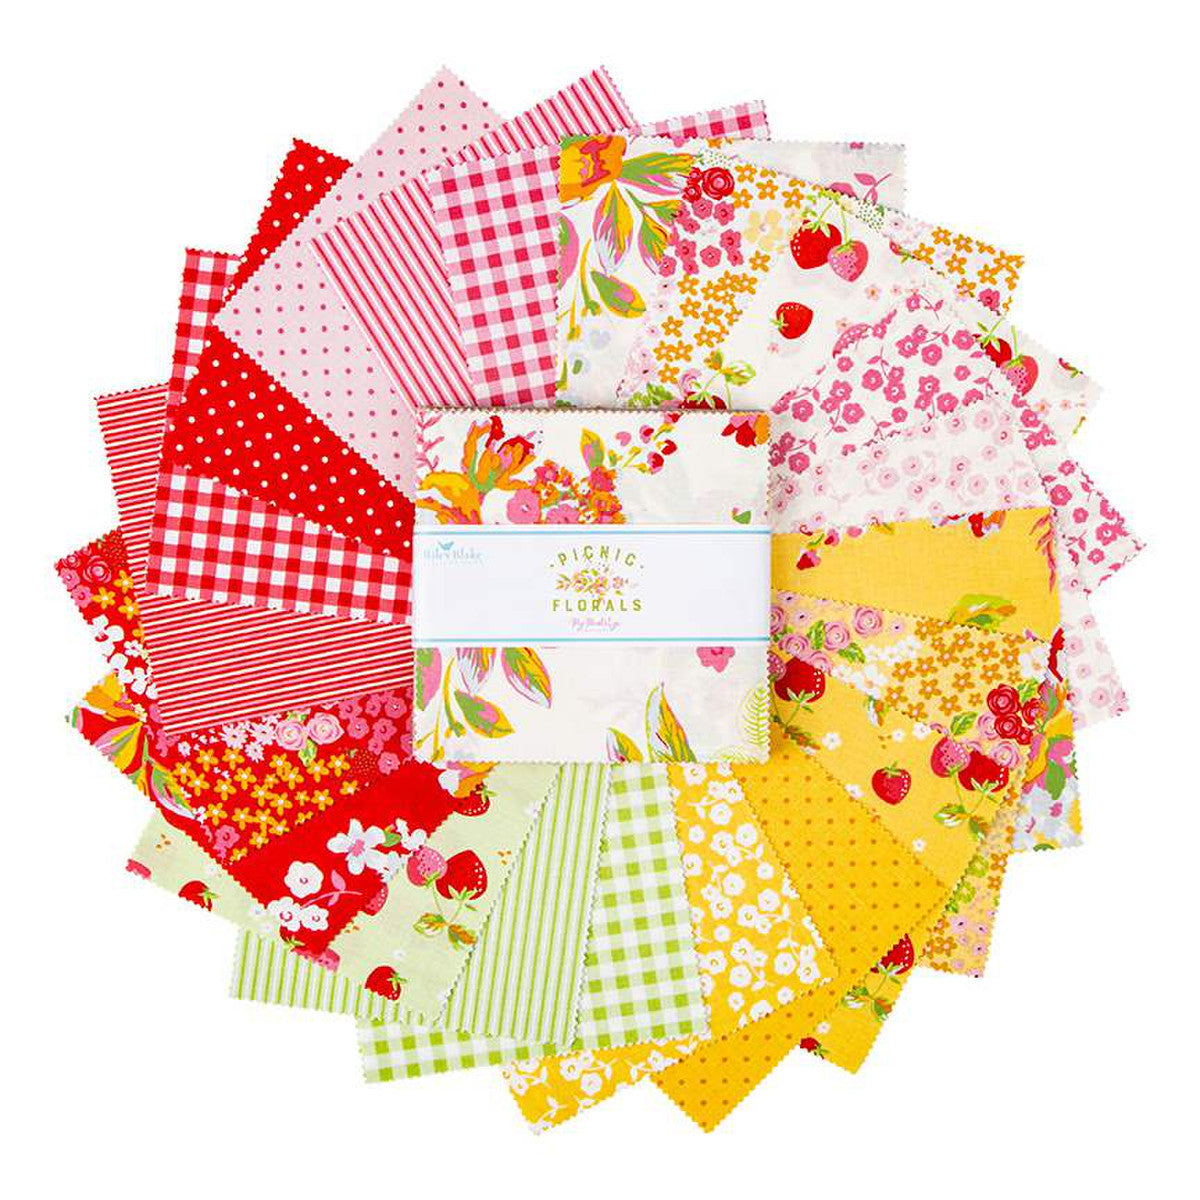 Picnic Florals - 5 inch Charm Pack by My Mind's Eye for Riley Blake (42pcs)